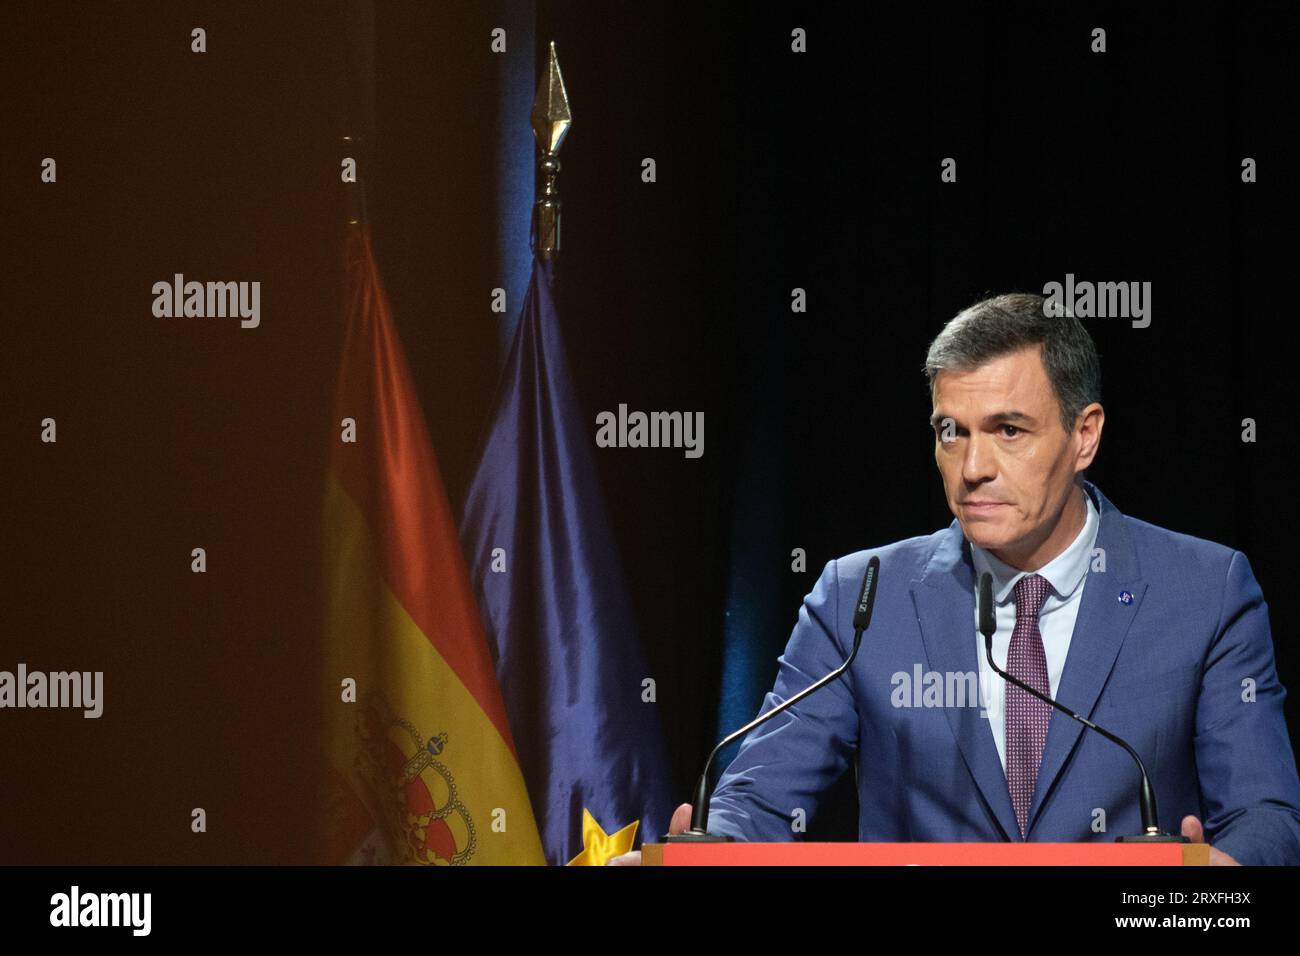 The  Prime Minister of Spain, Pedro Sanchez during the closing ceremony of the 'European Day of Languages', at the Cervantes Institute, on 25 Septembe Stock Photo